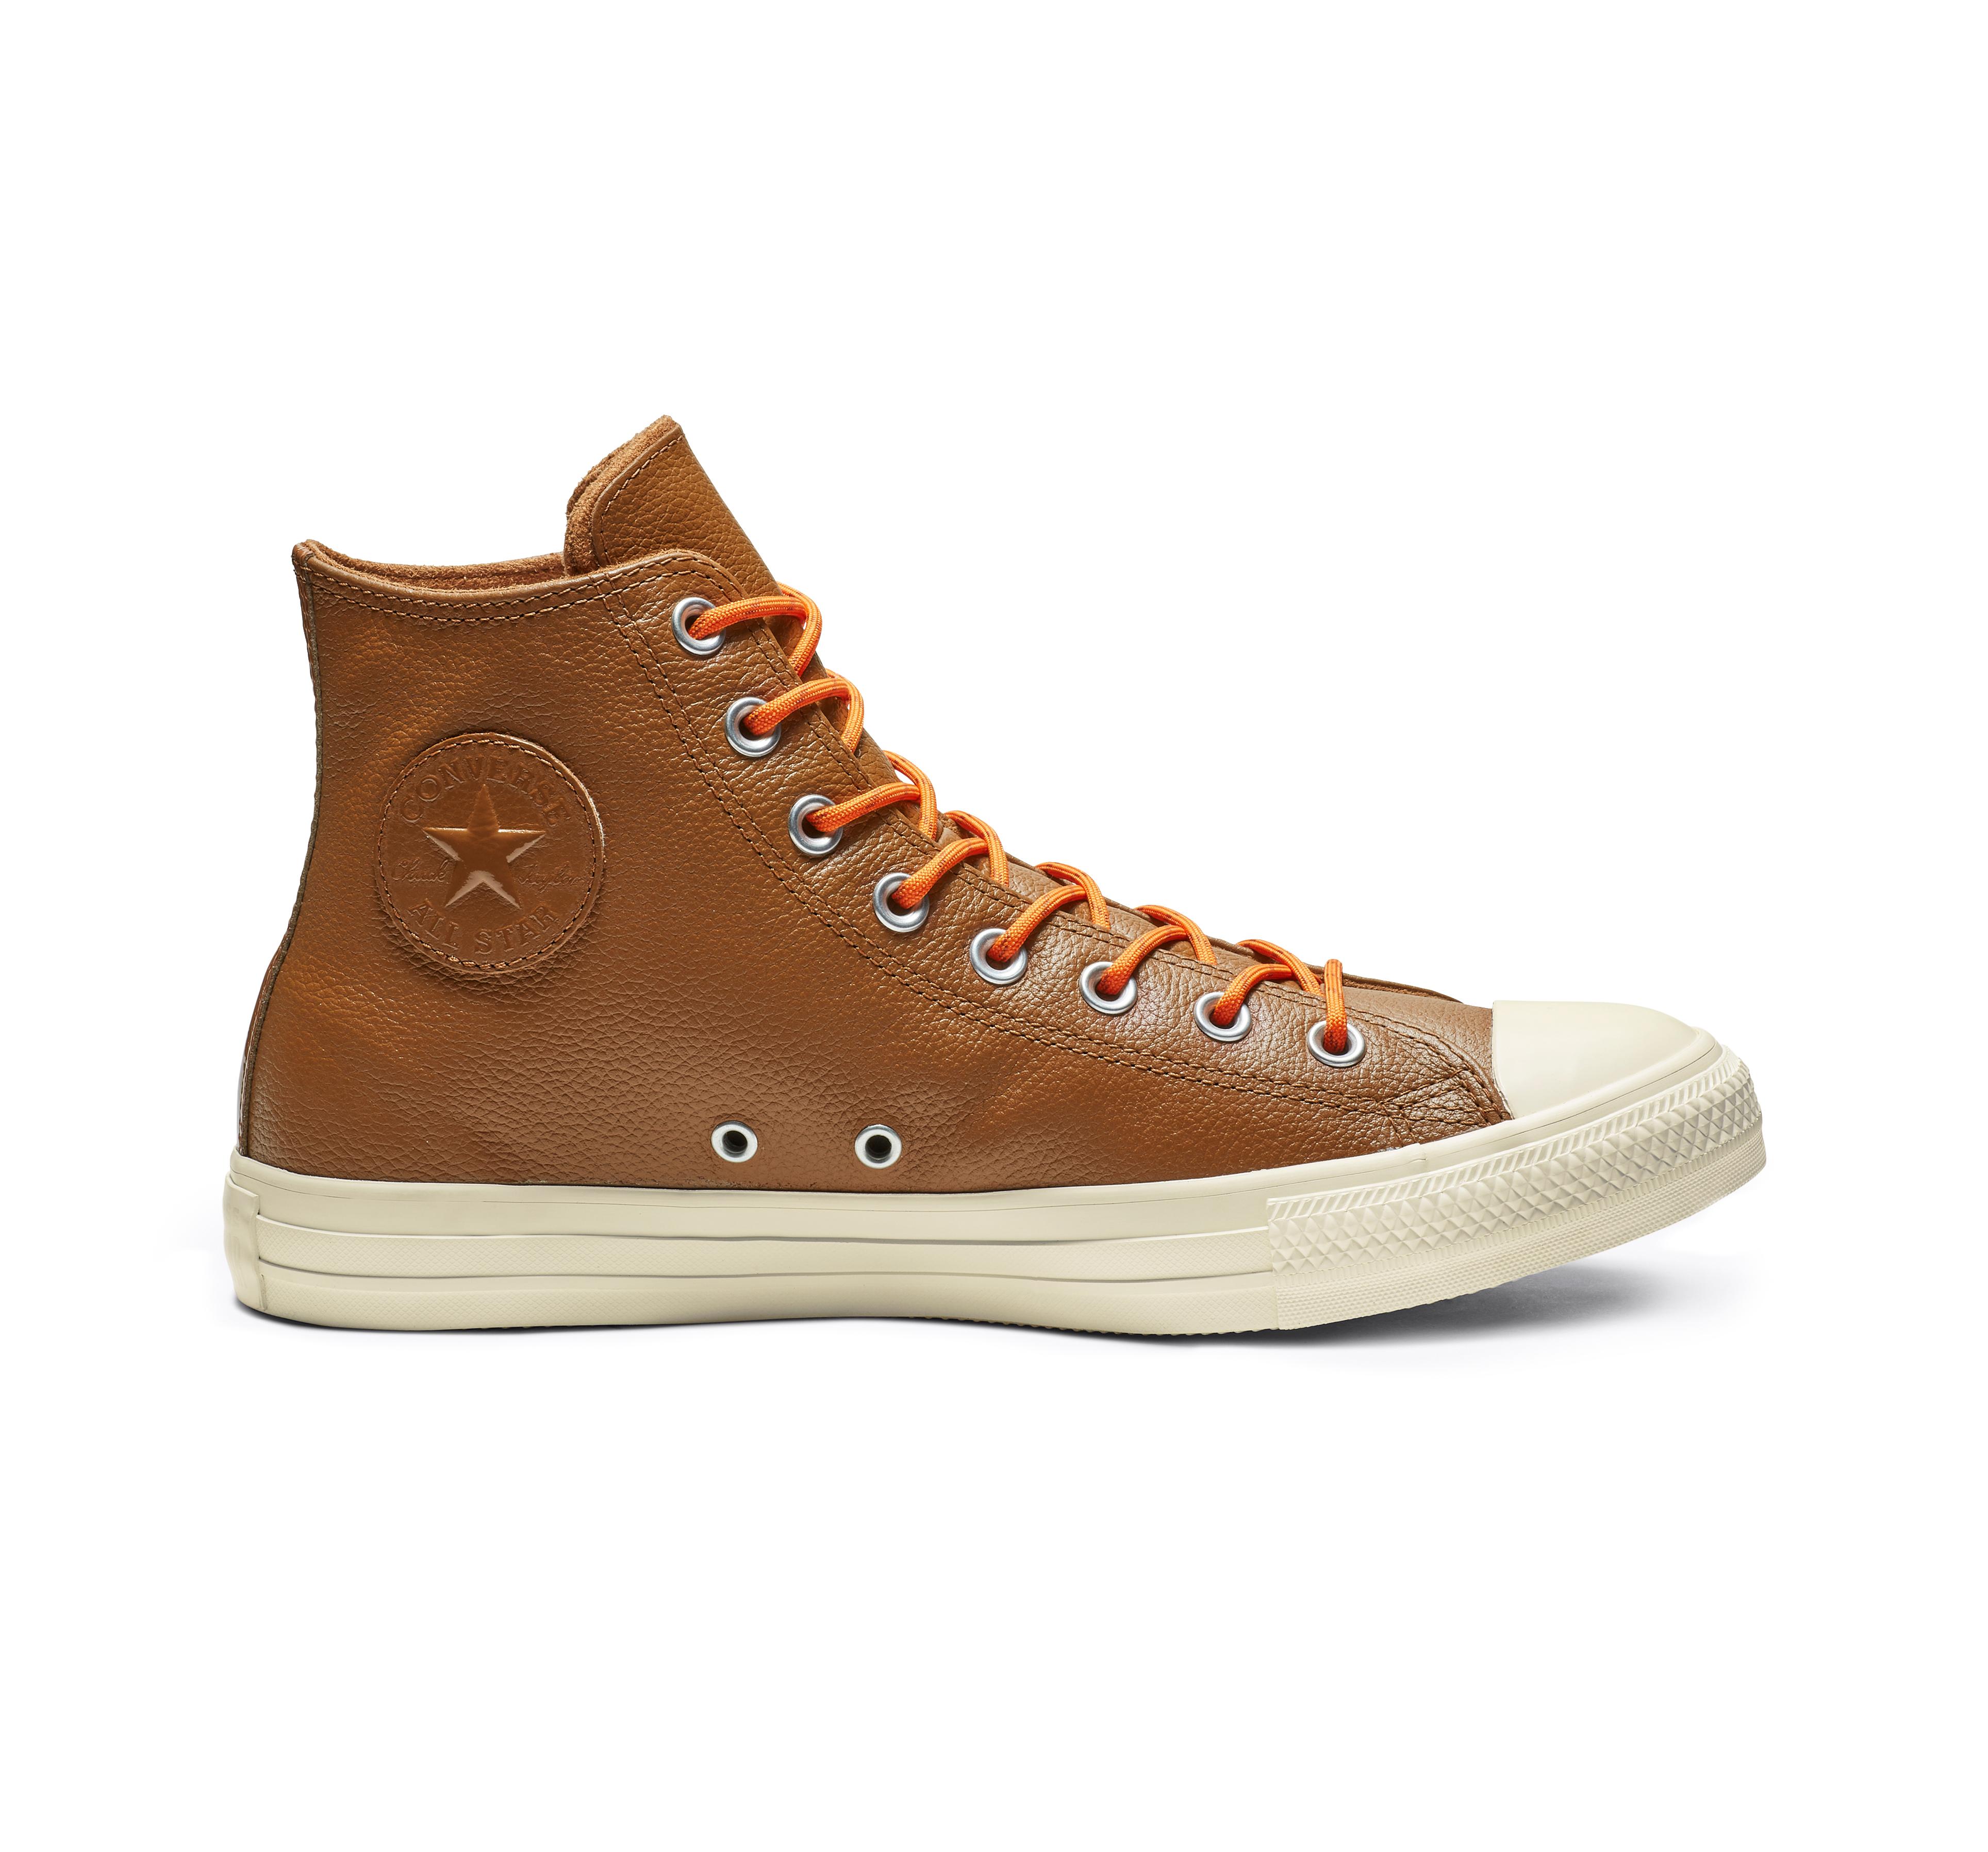 Converse Chuck Taylor All Star Limo Leather High Top in Brown - Lyst